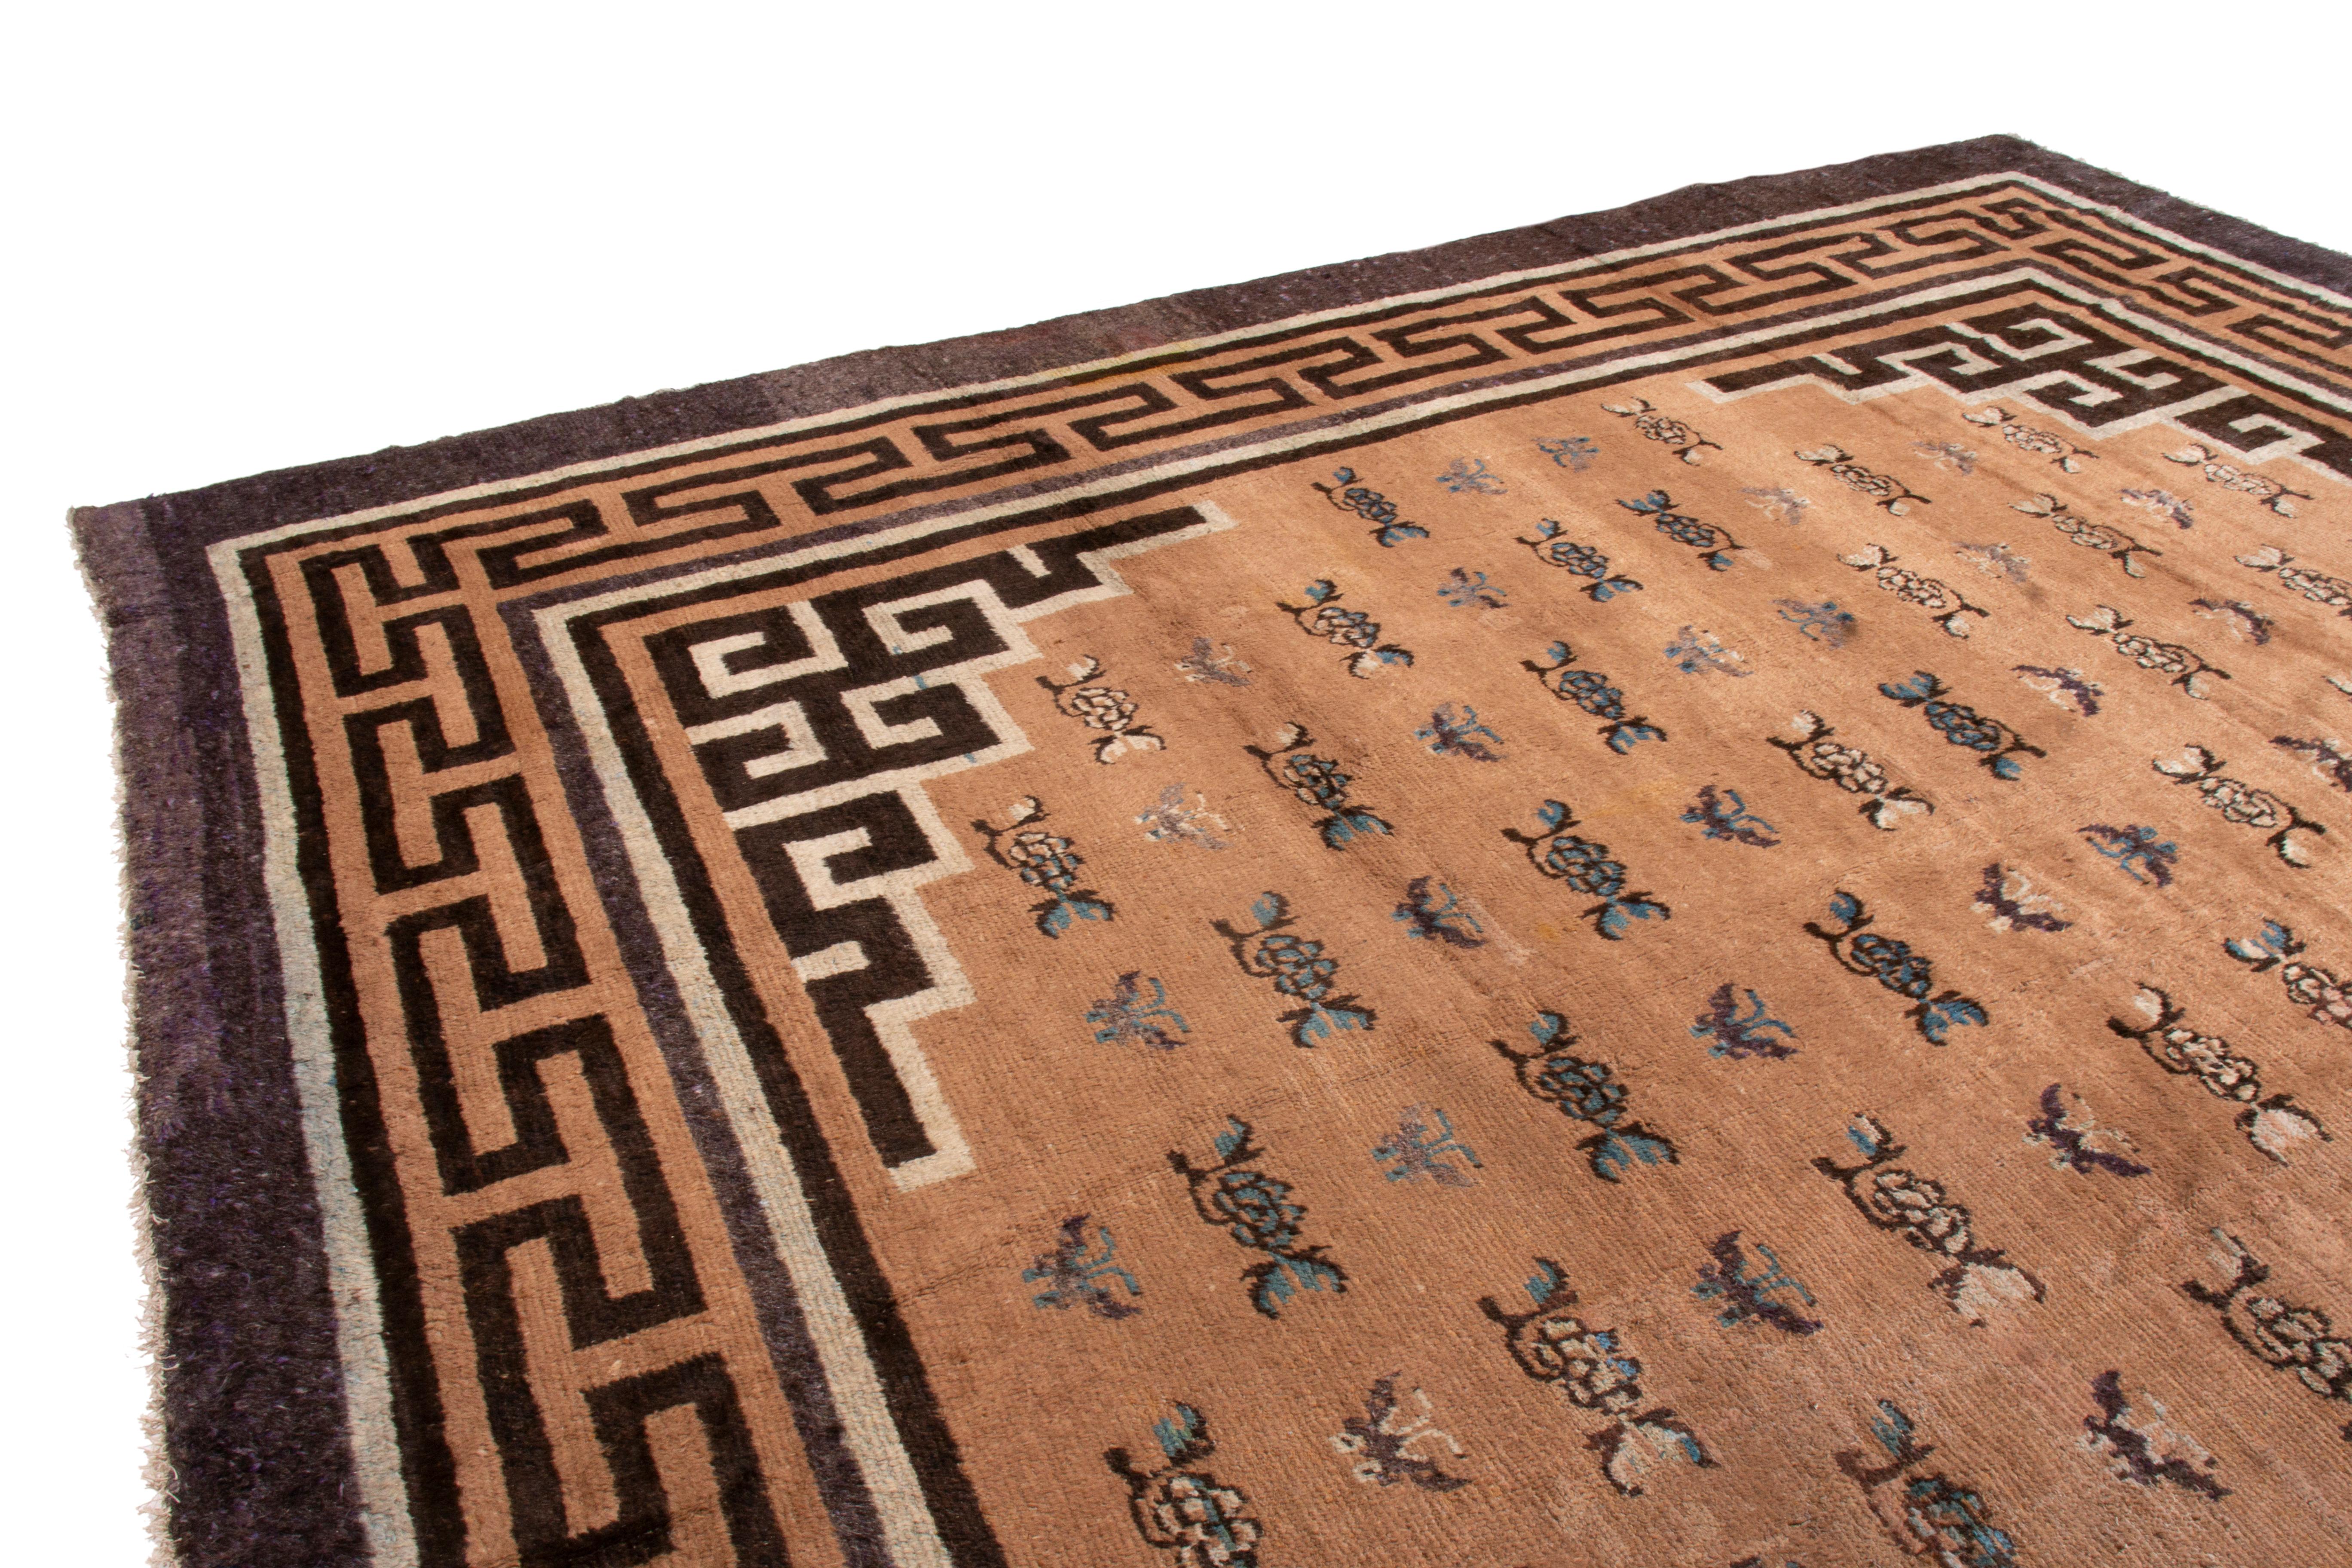 This antique transitional Mongolian wool rug has an all-over floral design with unique Chinese inspiration. From 1860-1870, the inner border features black right-angle characters—archaic Chinese symbols commonly seen in other oriental and Turkish